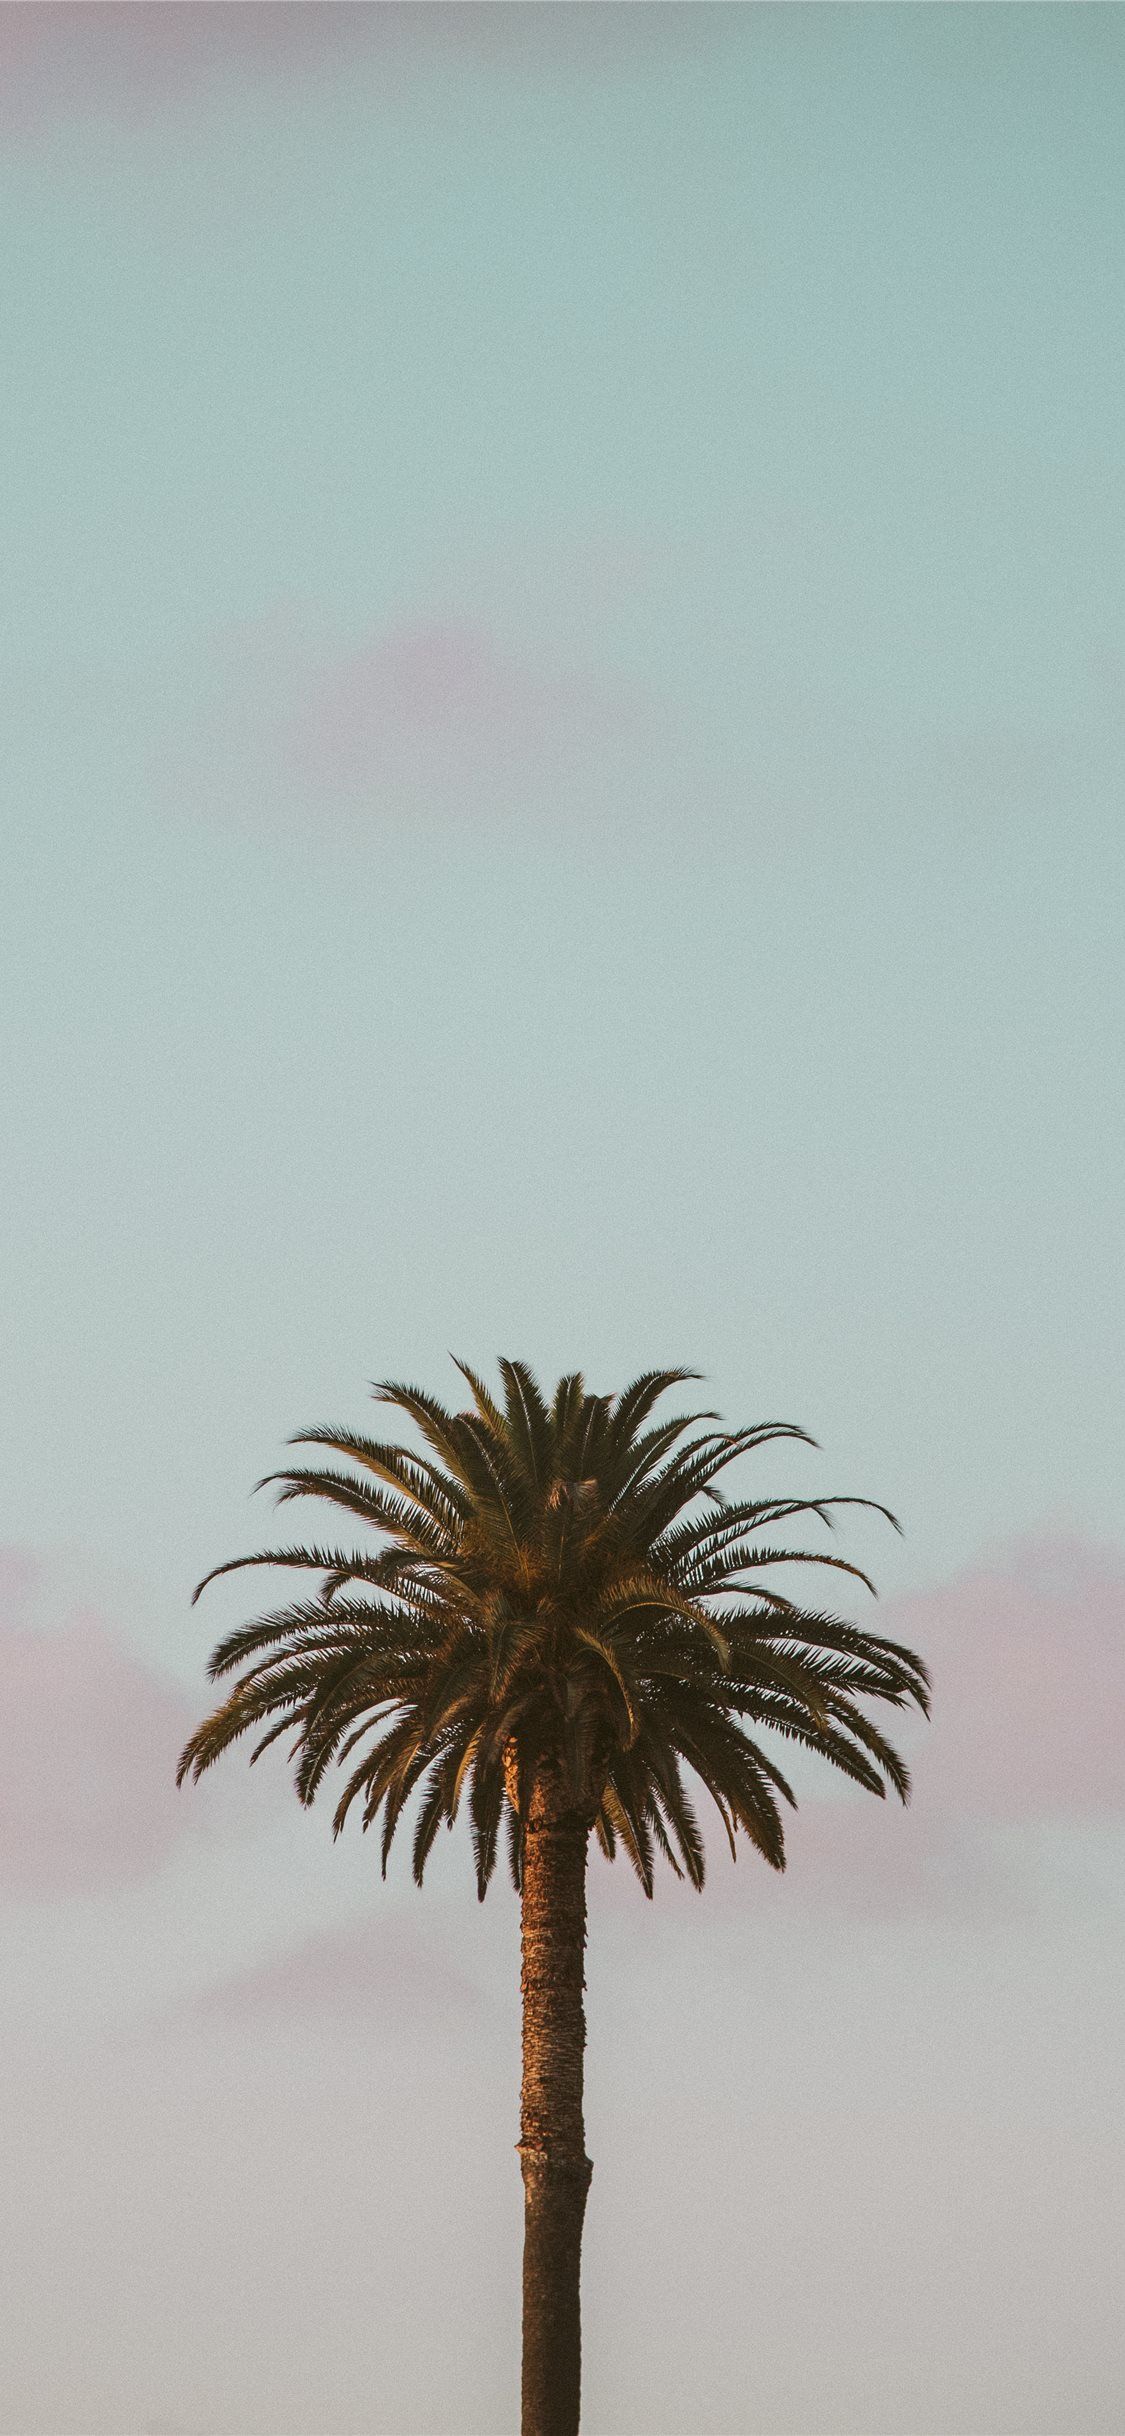 green palm tree iPhone X Wallpaper Free Download